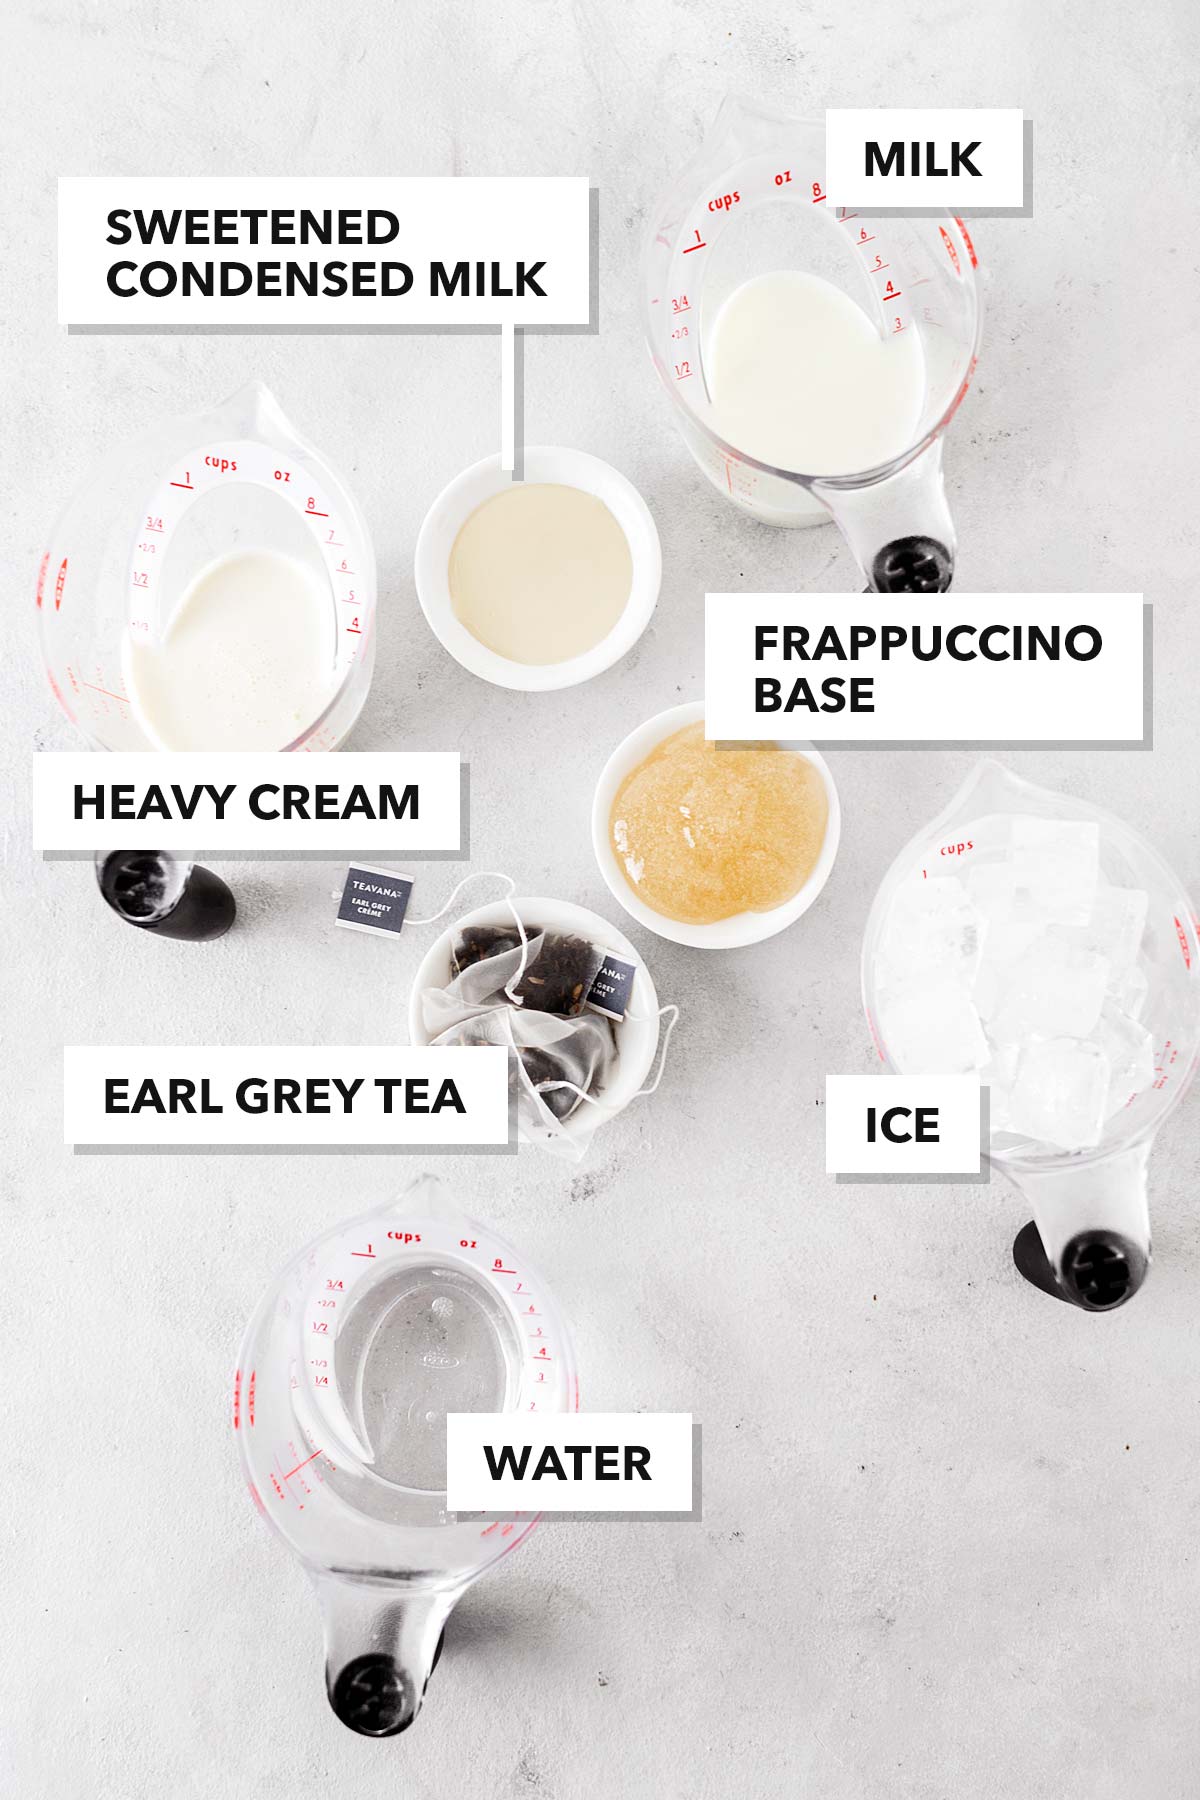 London Fog Frappuccino ingredients.